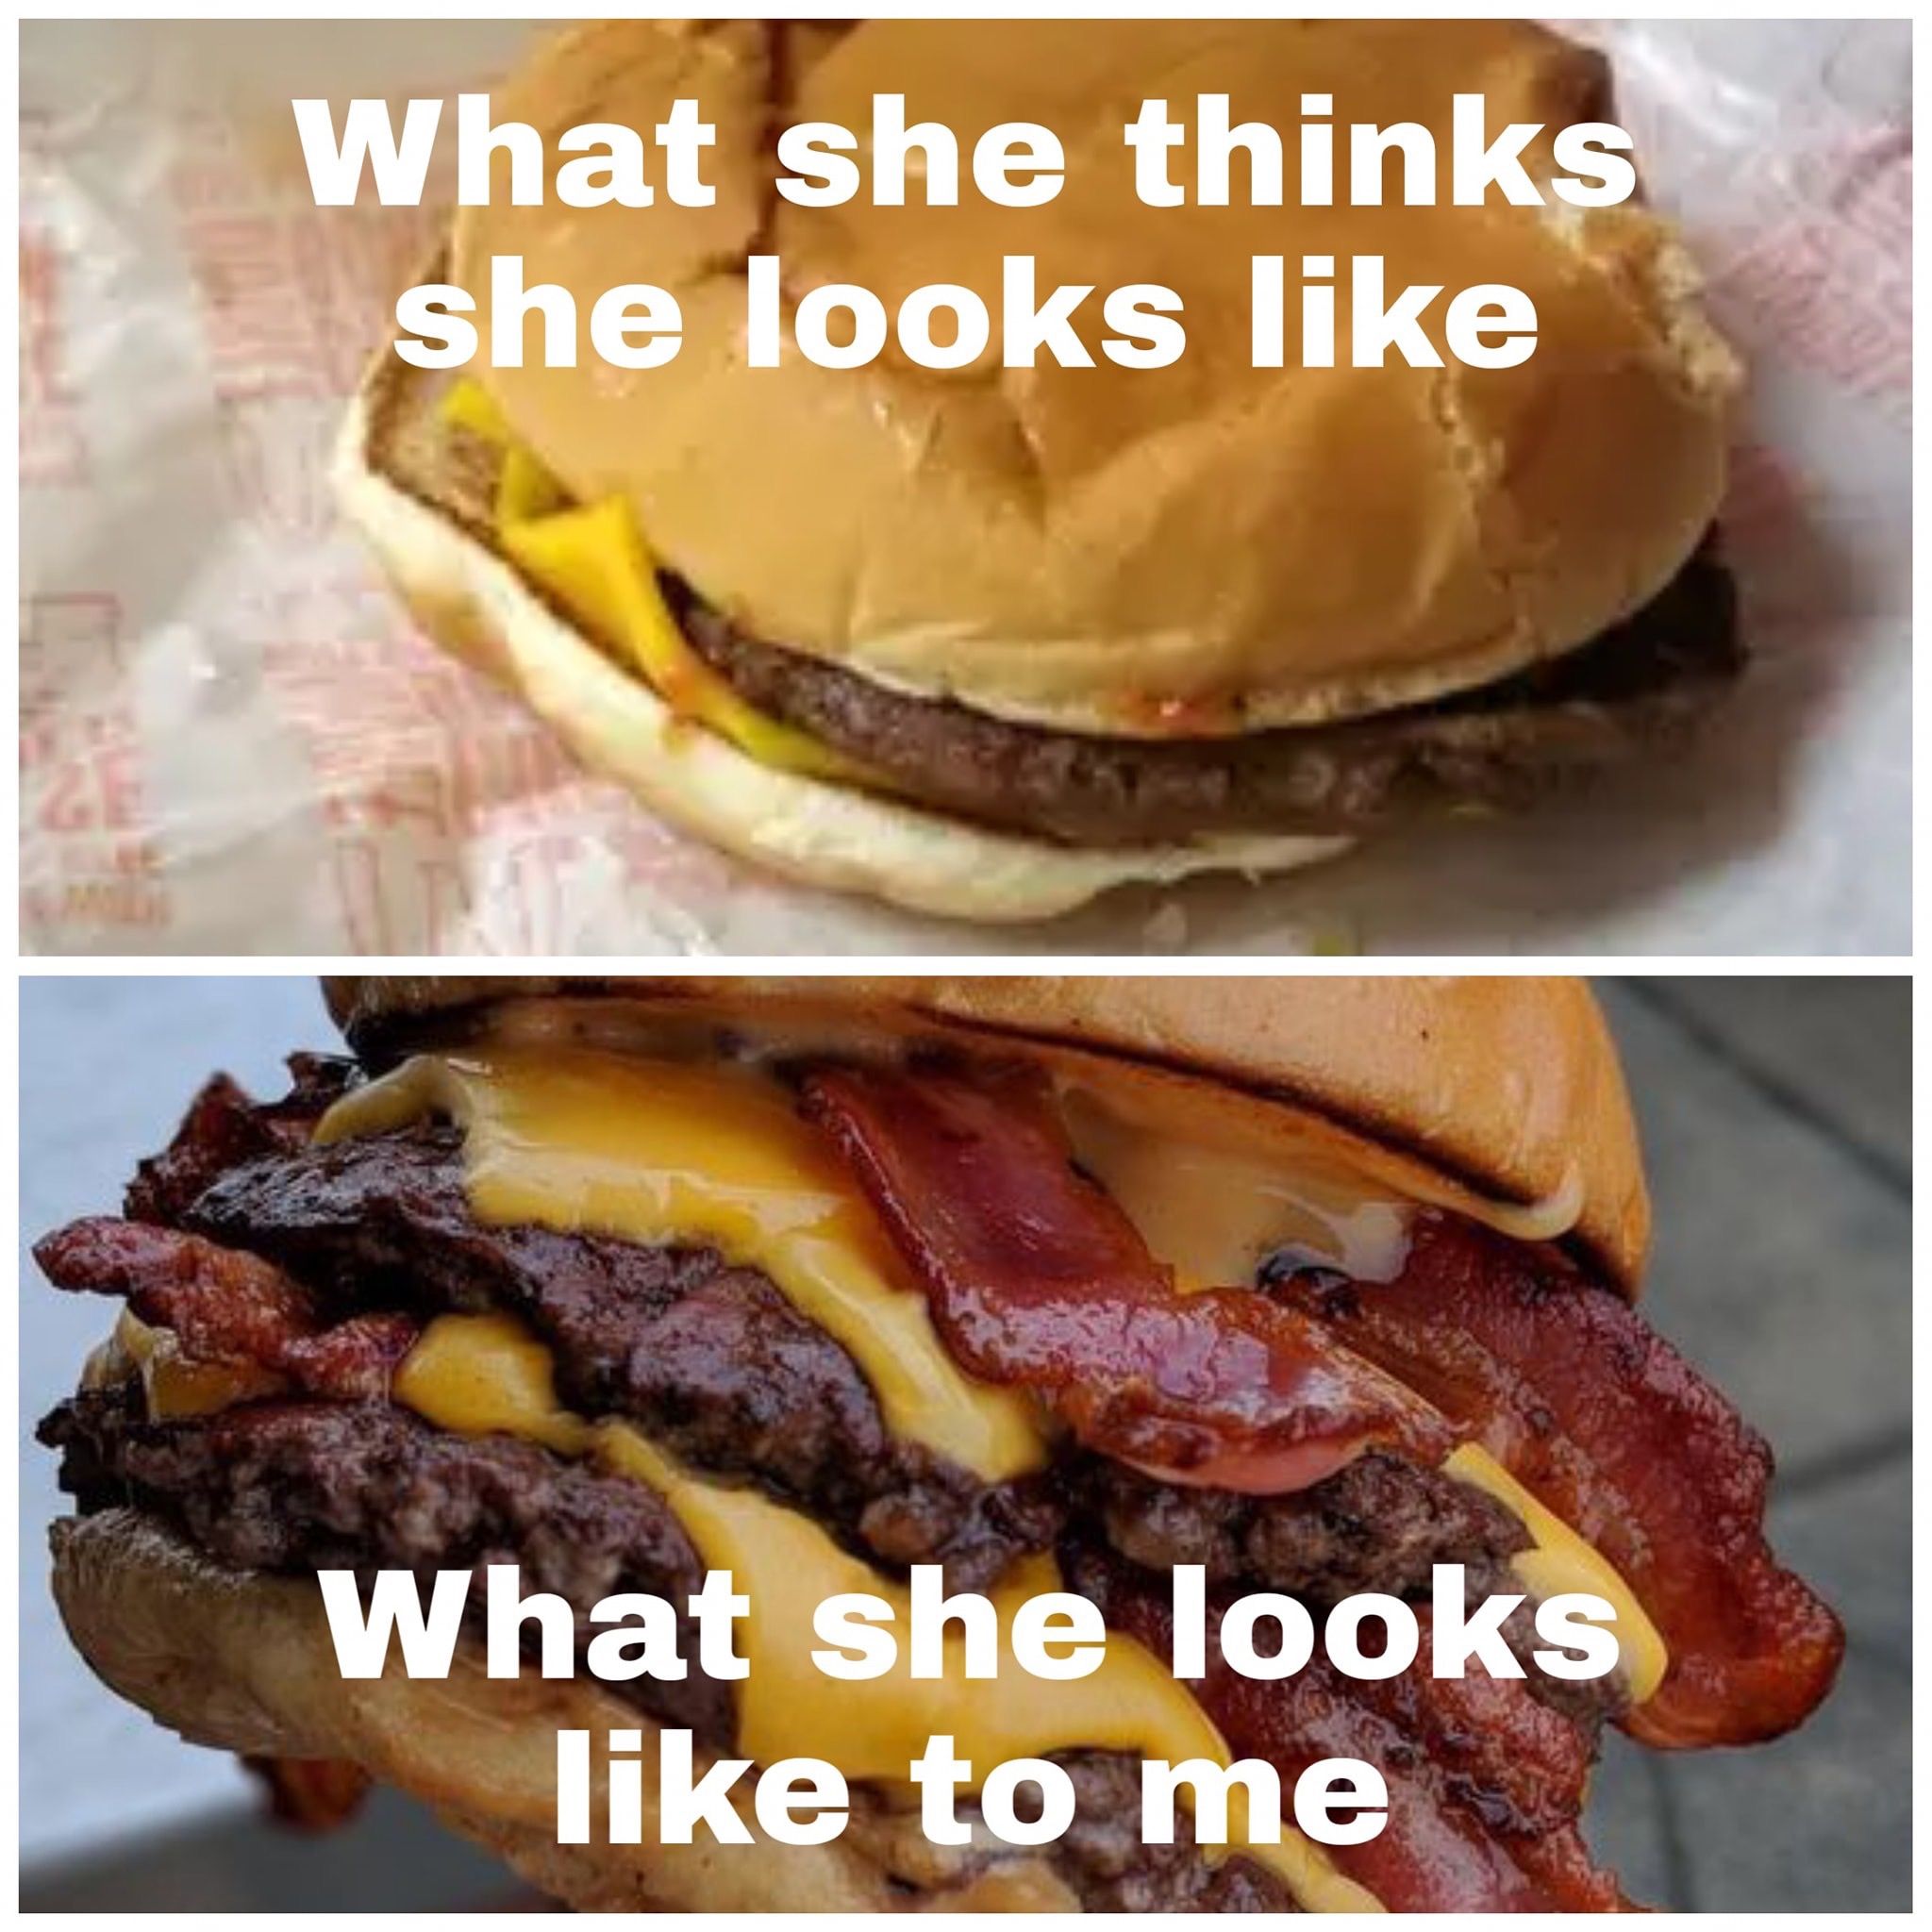 fast food - What she thinks she looks What she looks to me